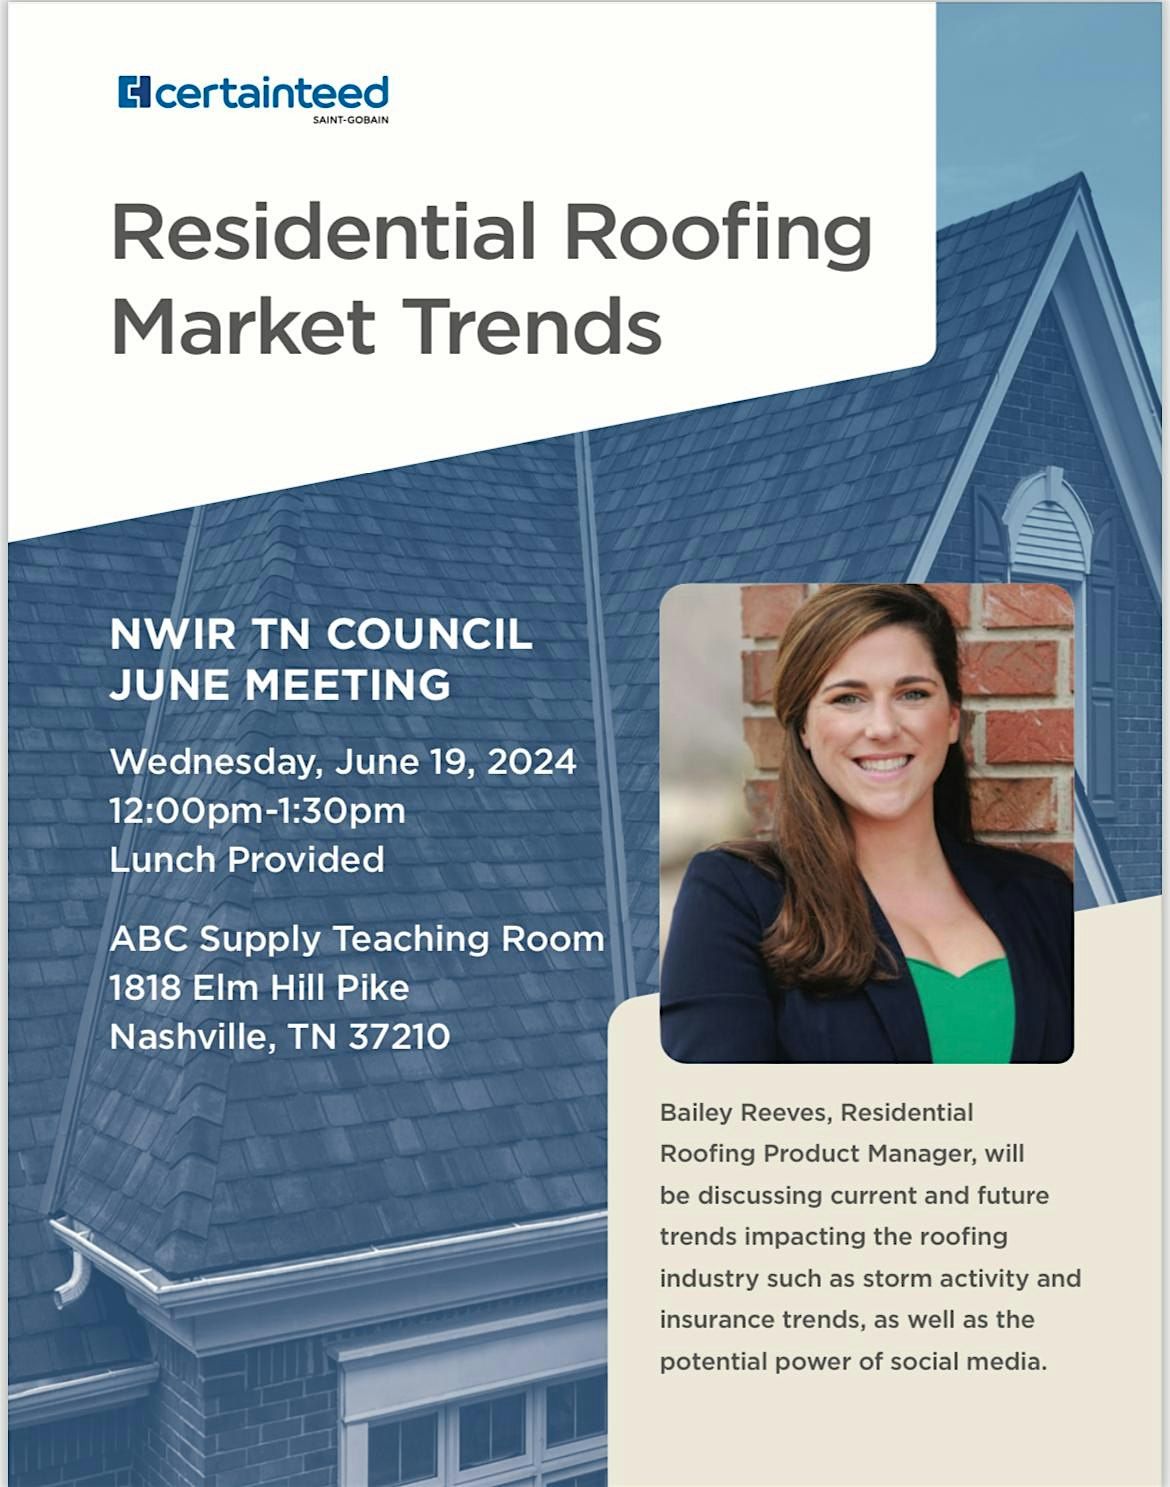 Residential Roofing Market Trends